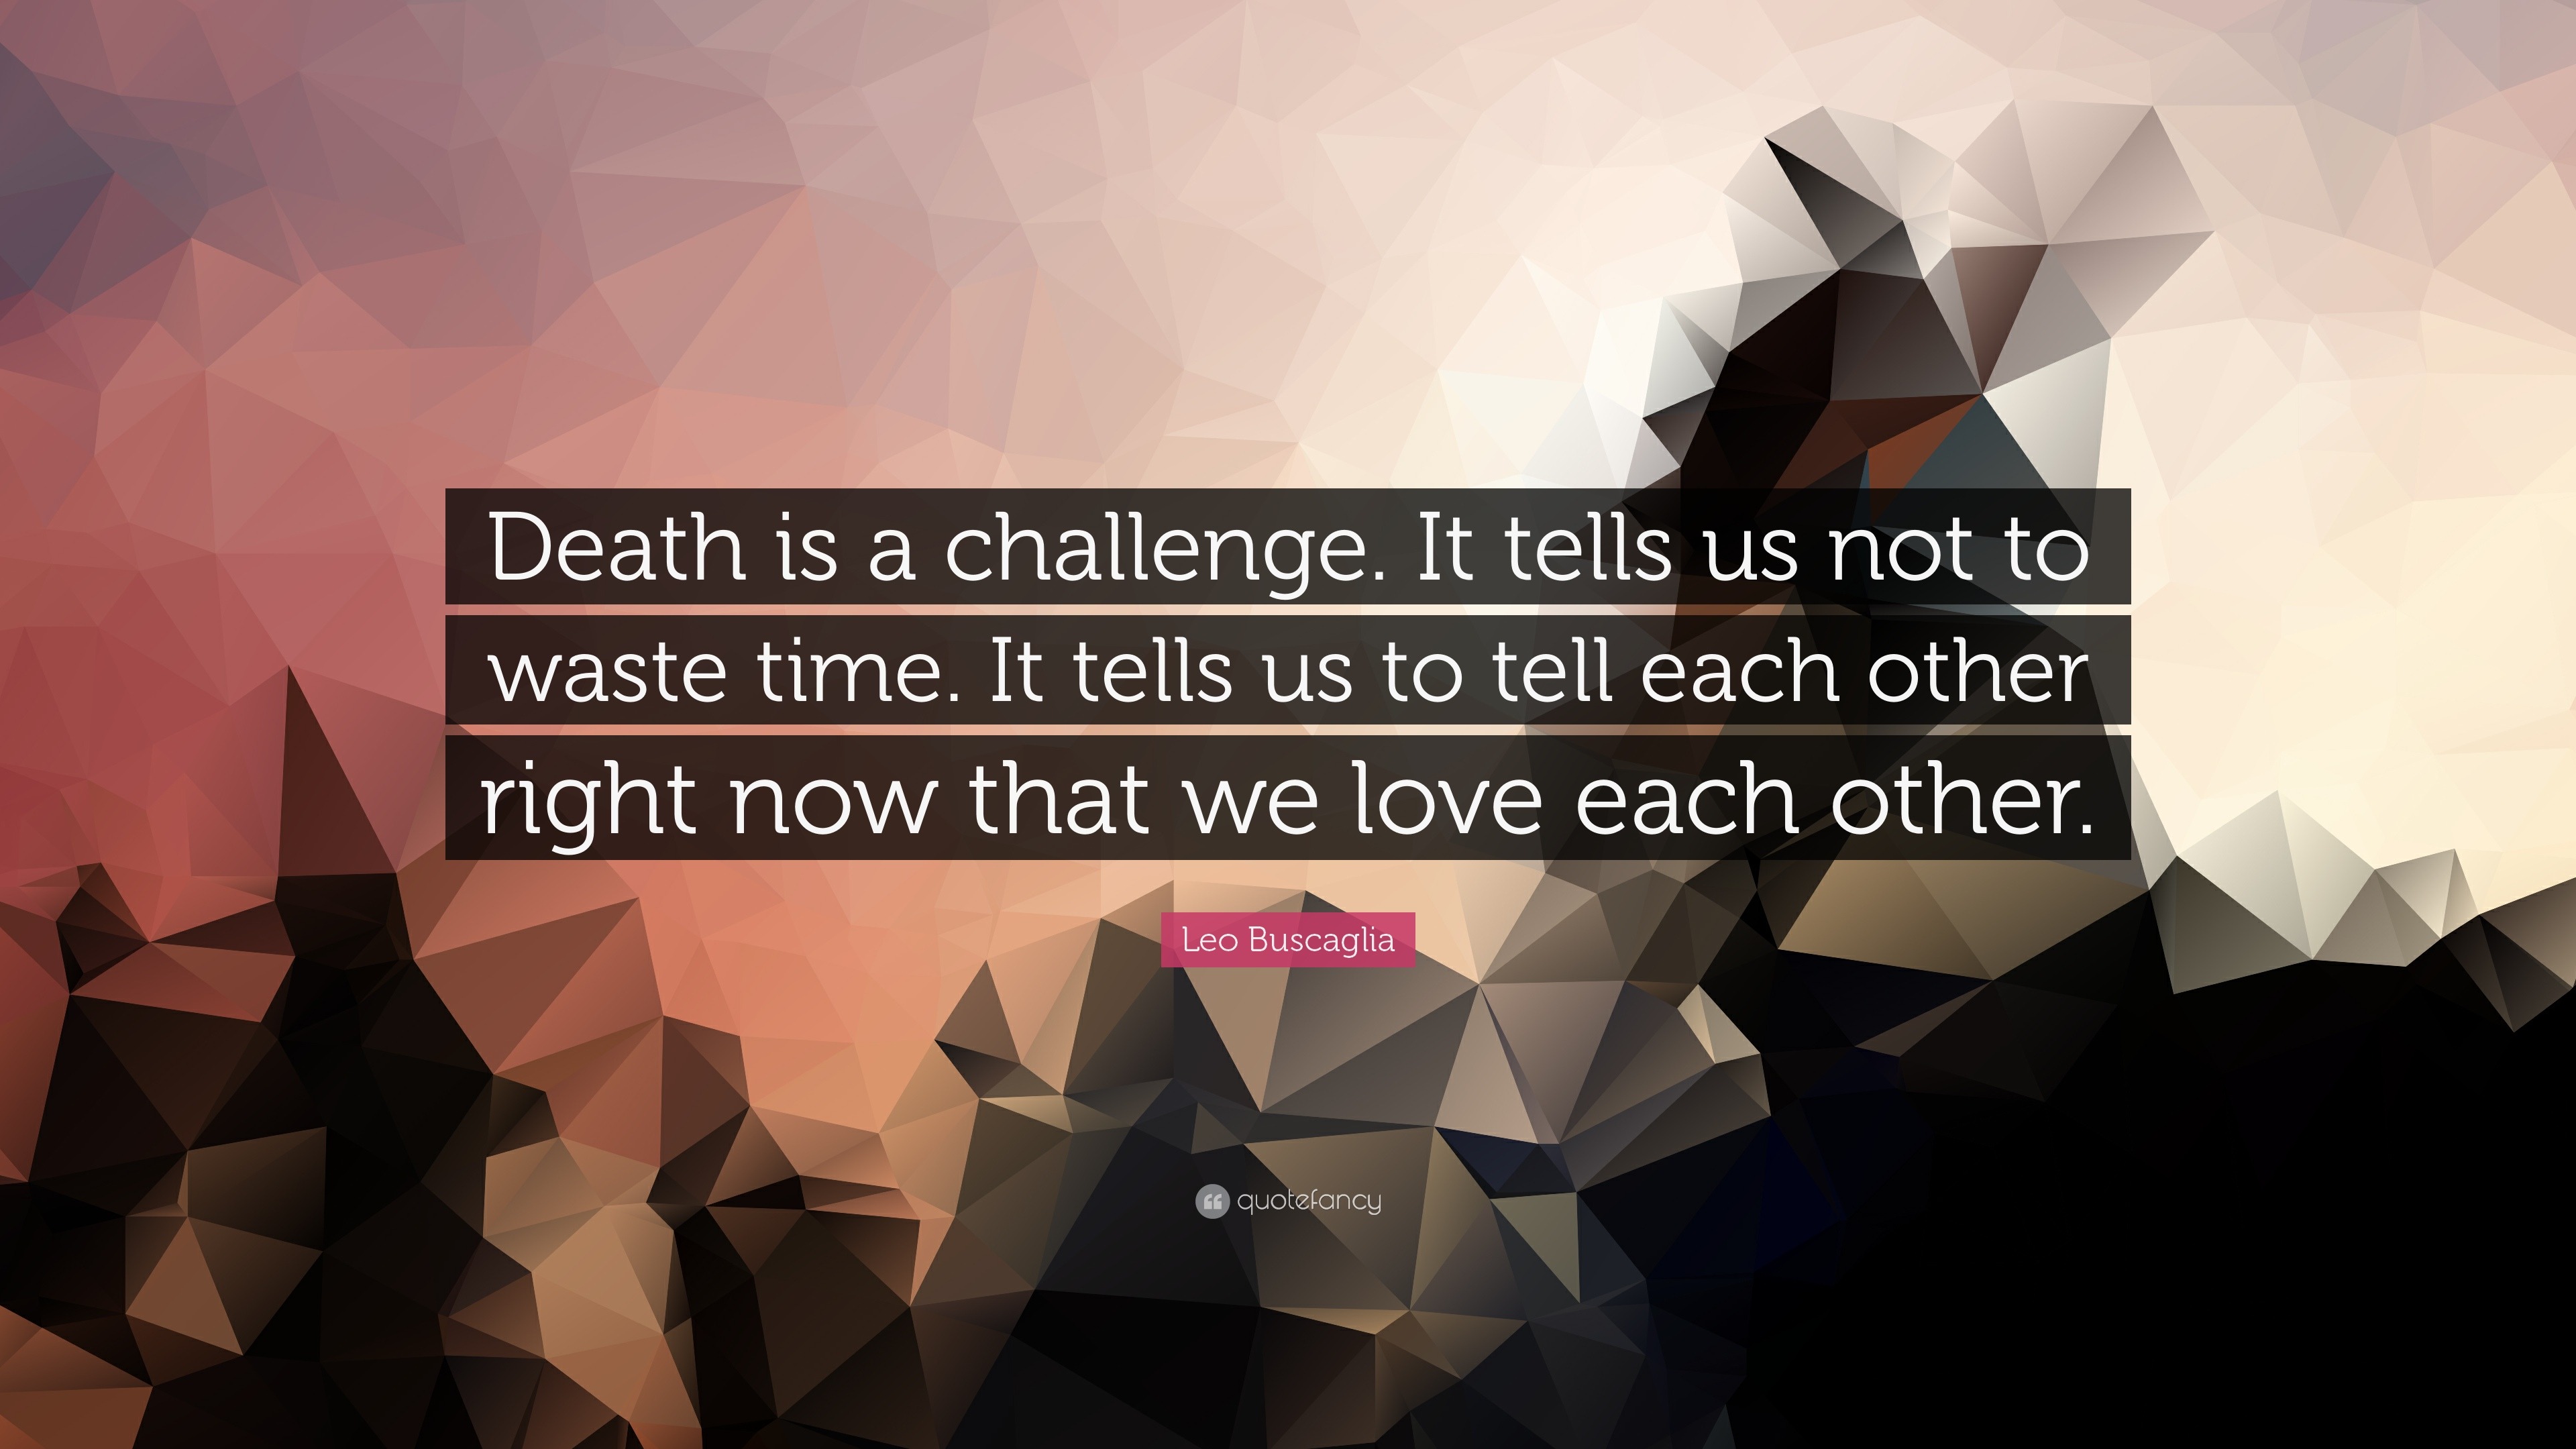 Leo Buscaglia Quote “Death is a challenge It tells us not to waste